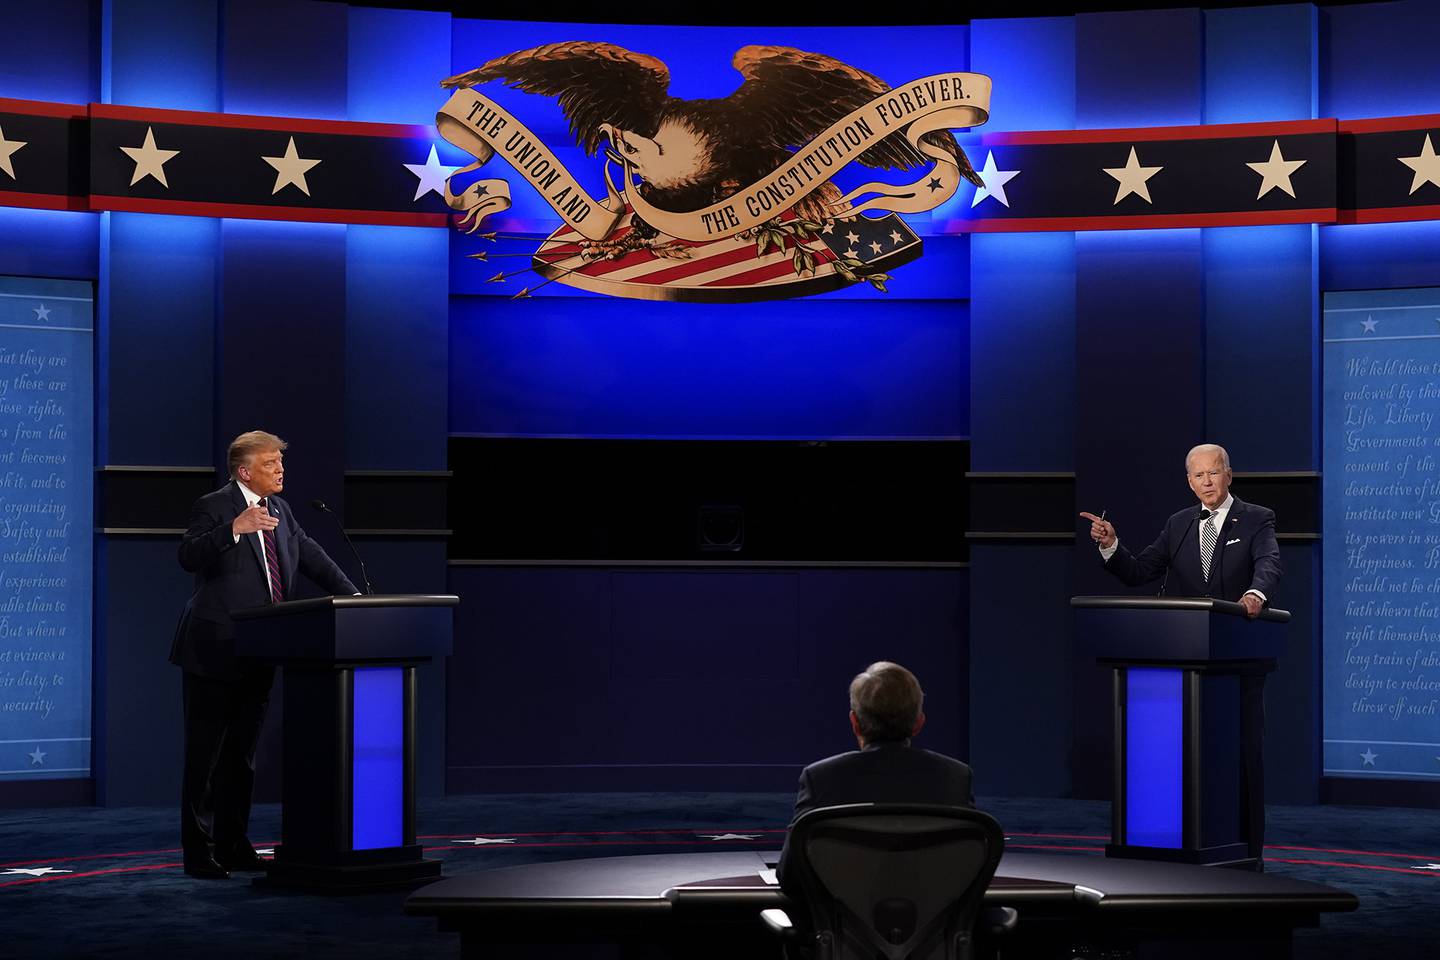 President Donald Trump, left, and Democratic presidential candidate former Vice President Joe Biden, right, with moderator Chris Wallace, center, of Fox News during the first presidential debate Tuesday, Sept. 29, 2020, at Case Western University and Cleveland Clinic, in Cleveland.